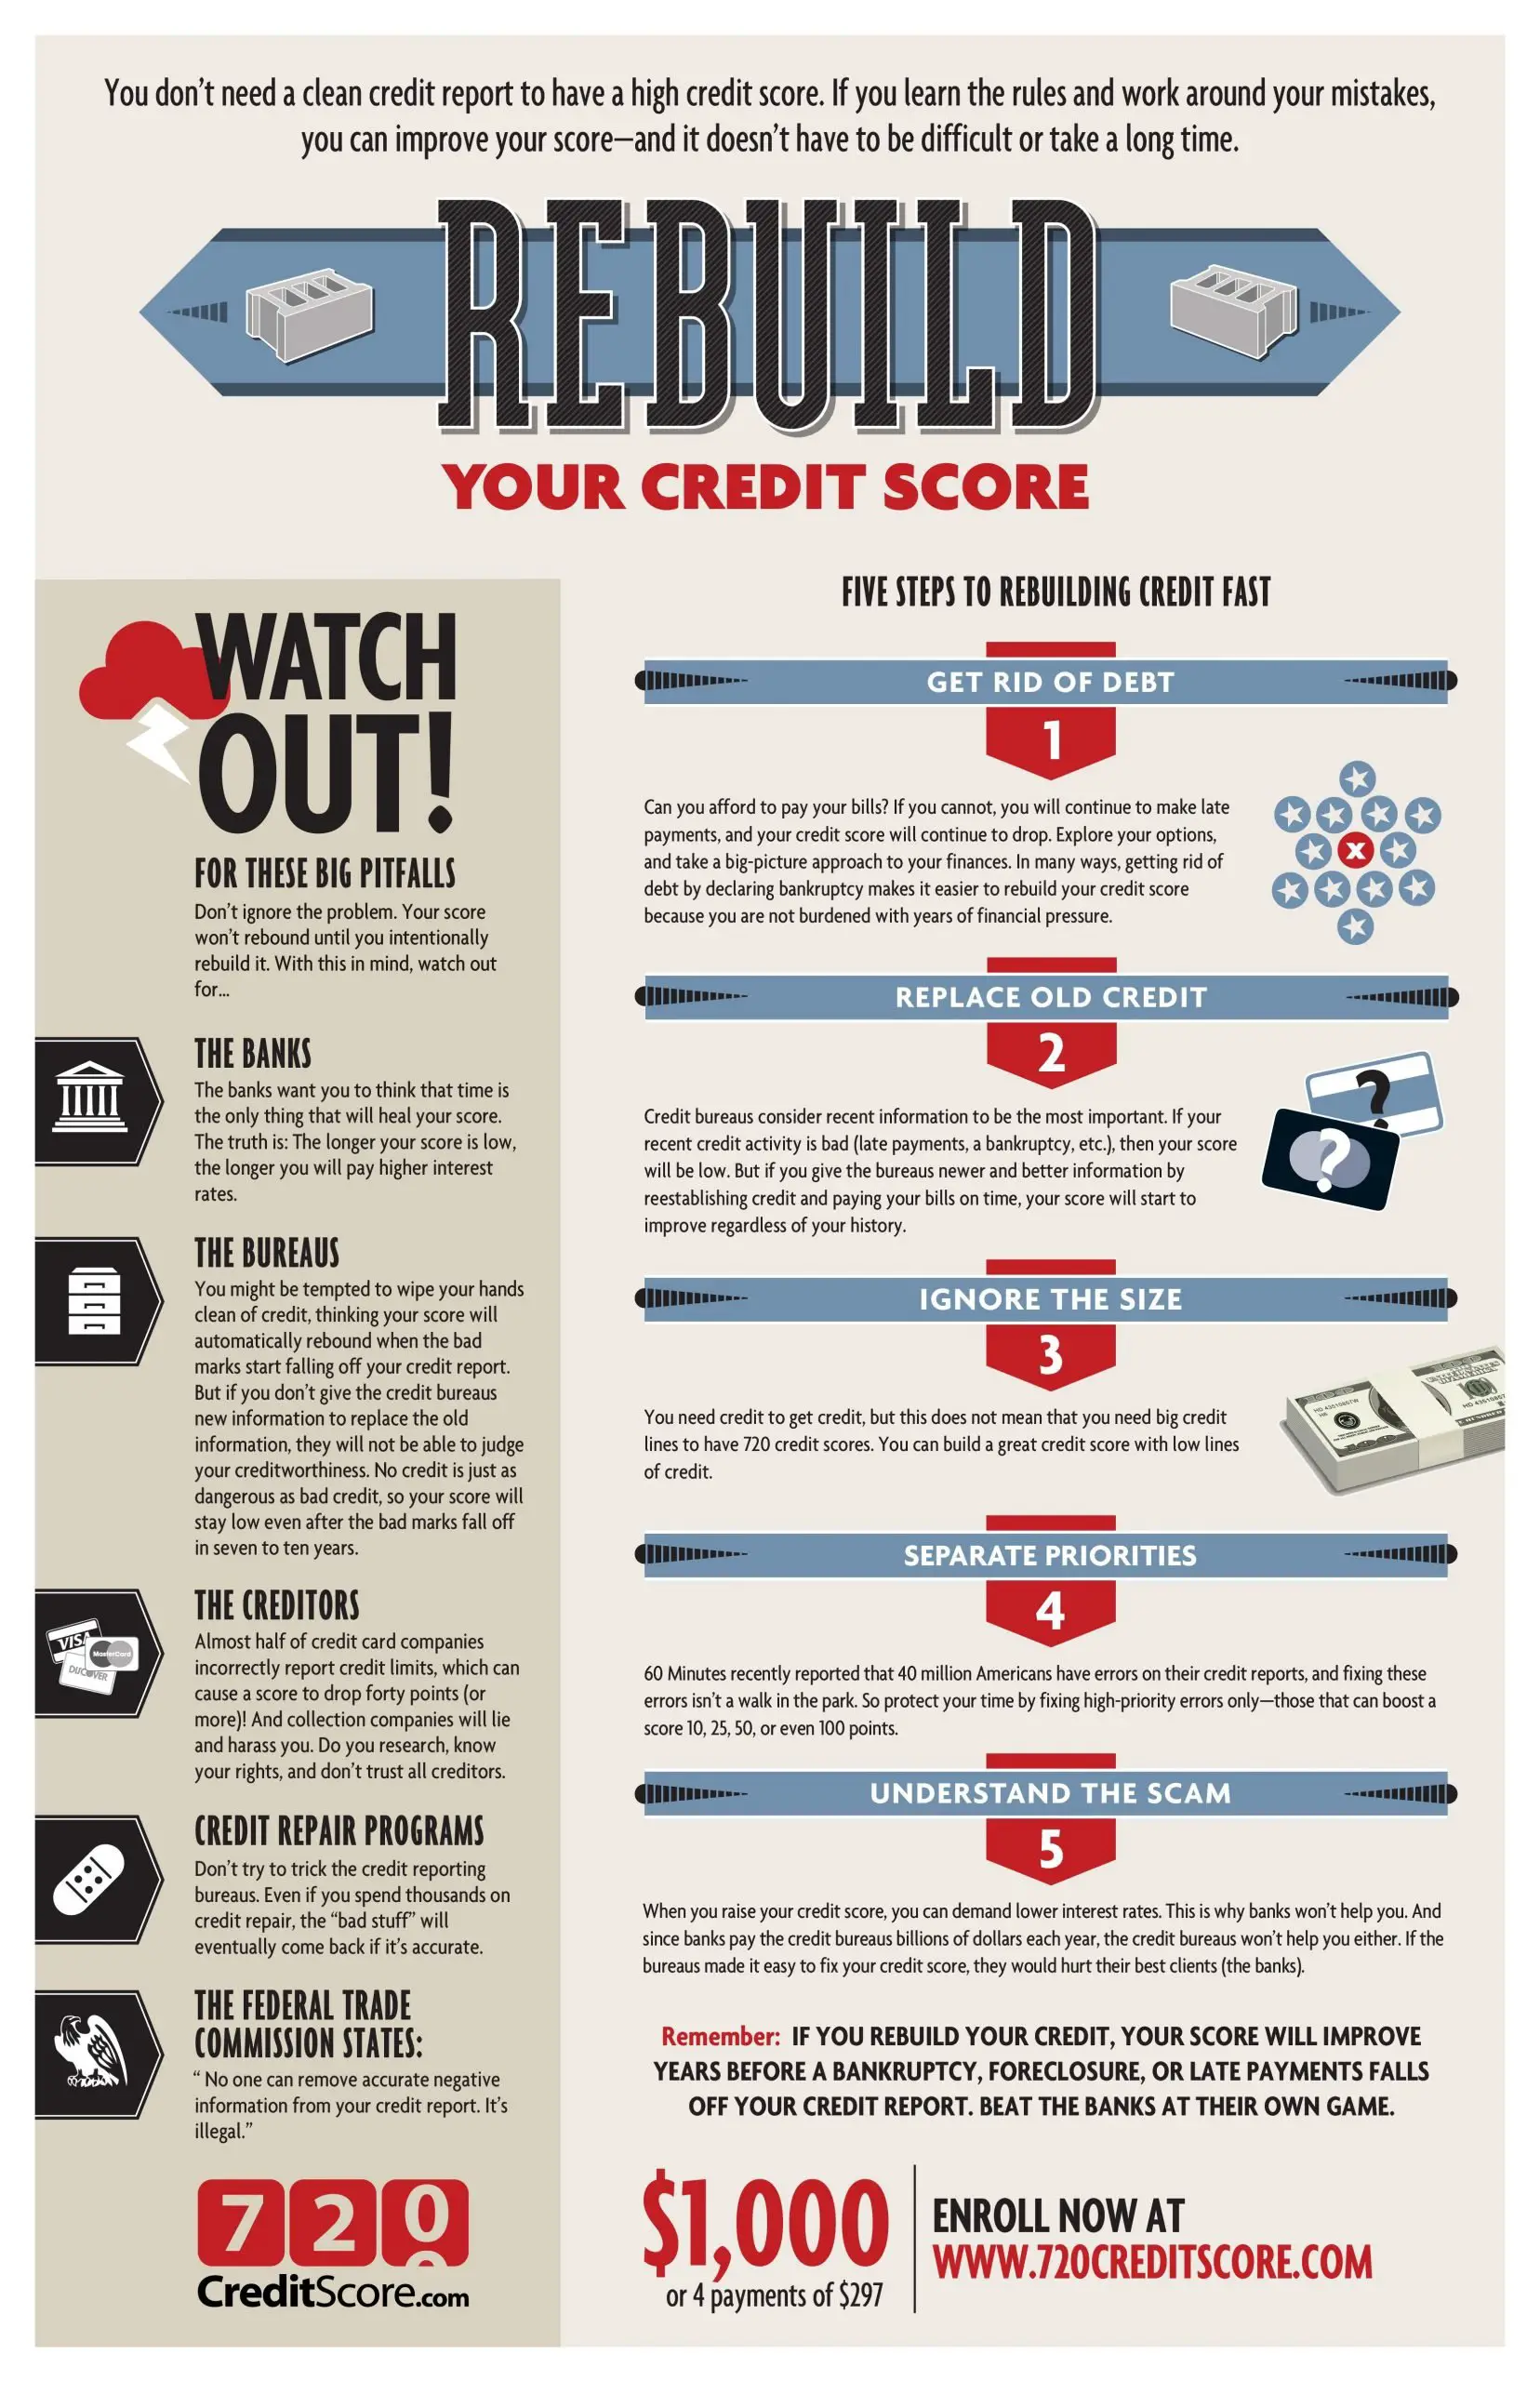 How to Rebuild Credit after Bankruptcy